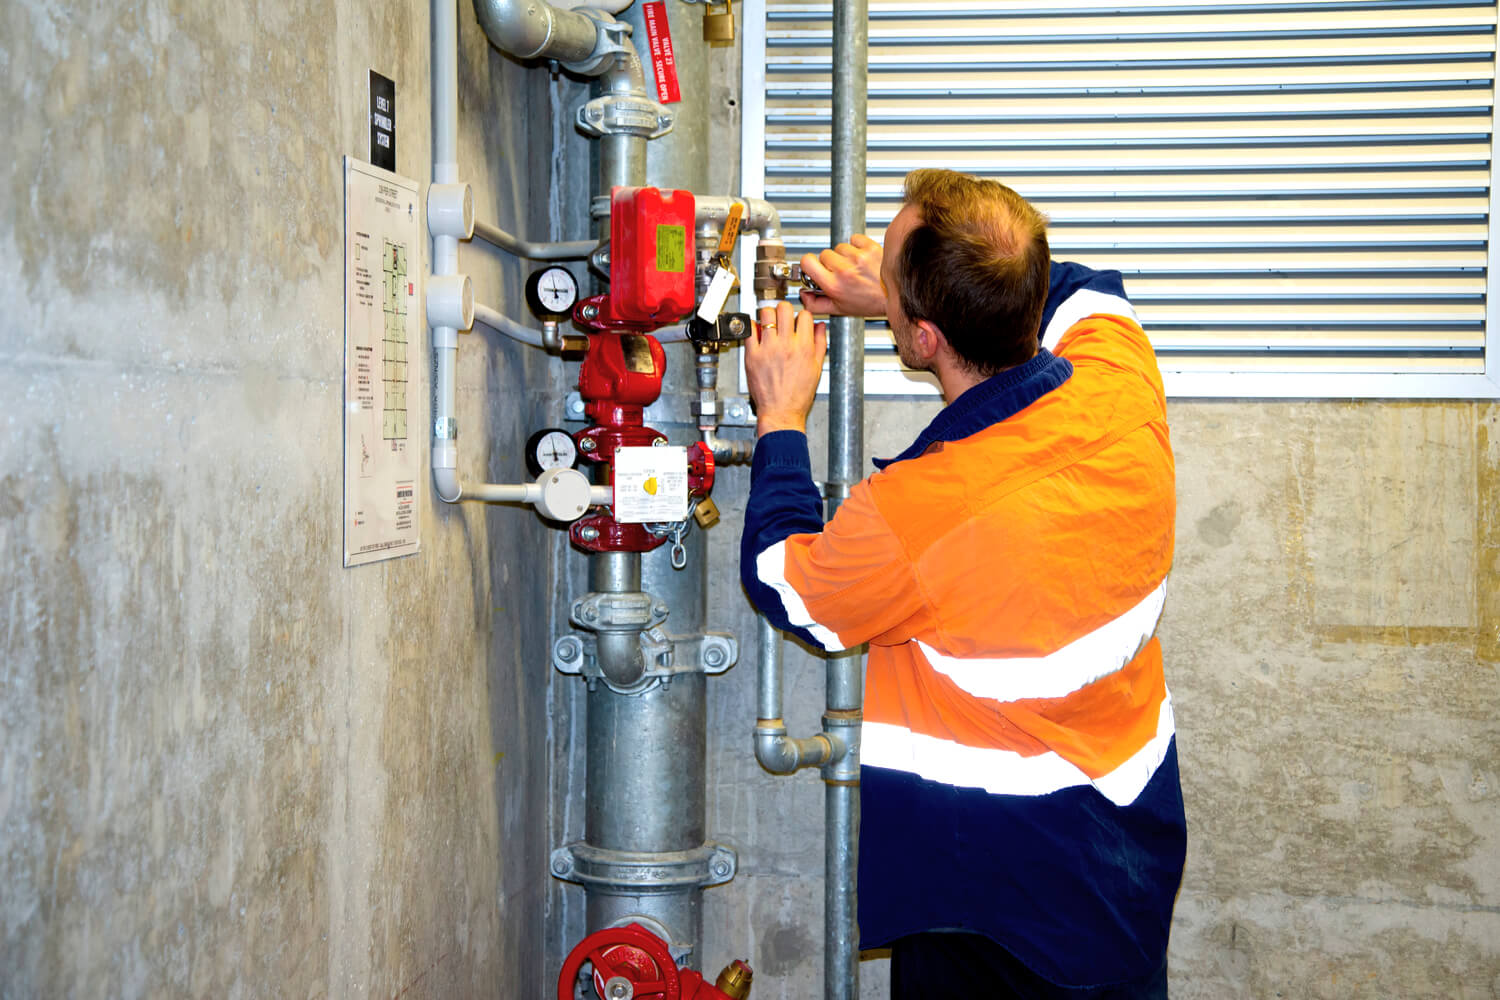 Man looking at pressurized water pipes in a commercial building